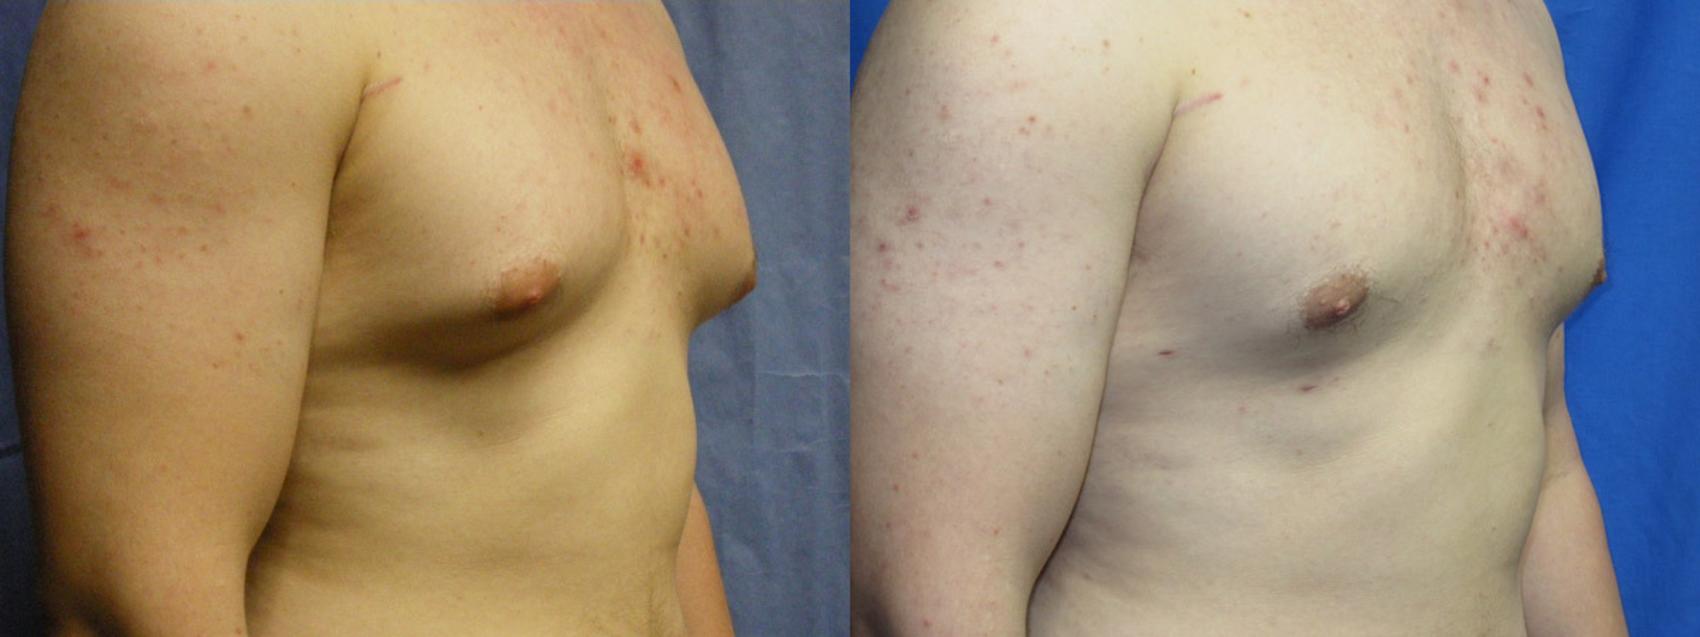 Liposuction - Male Chest Before and After Pictures Case 3